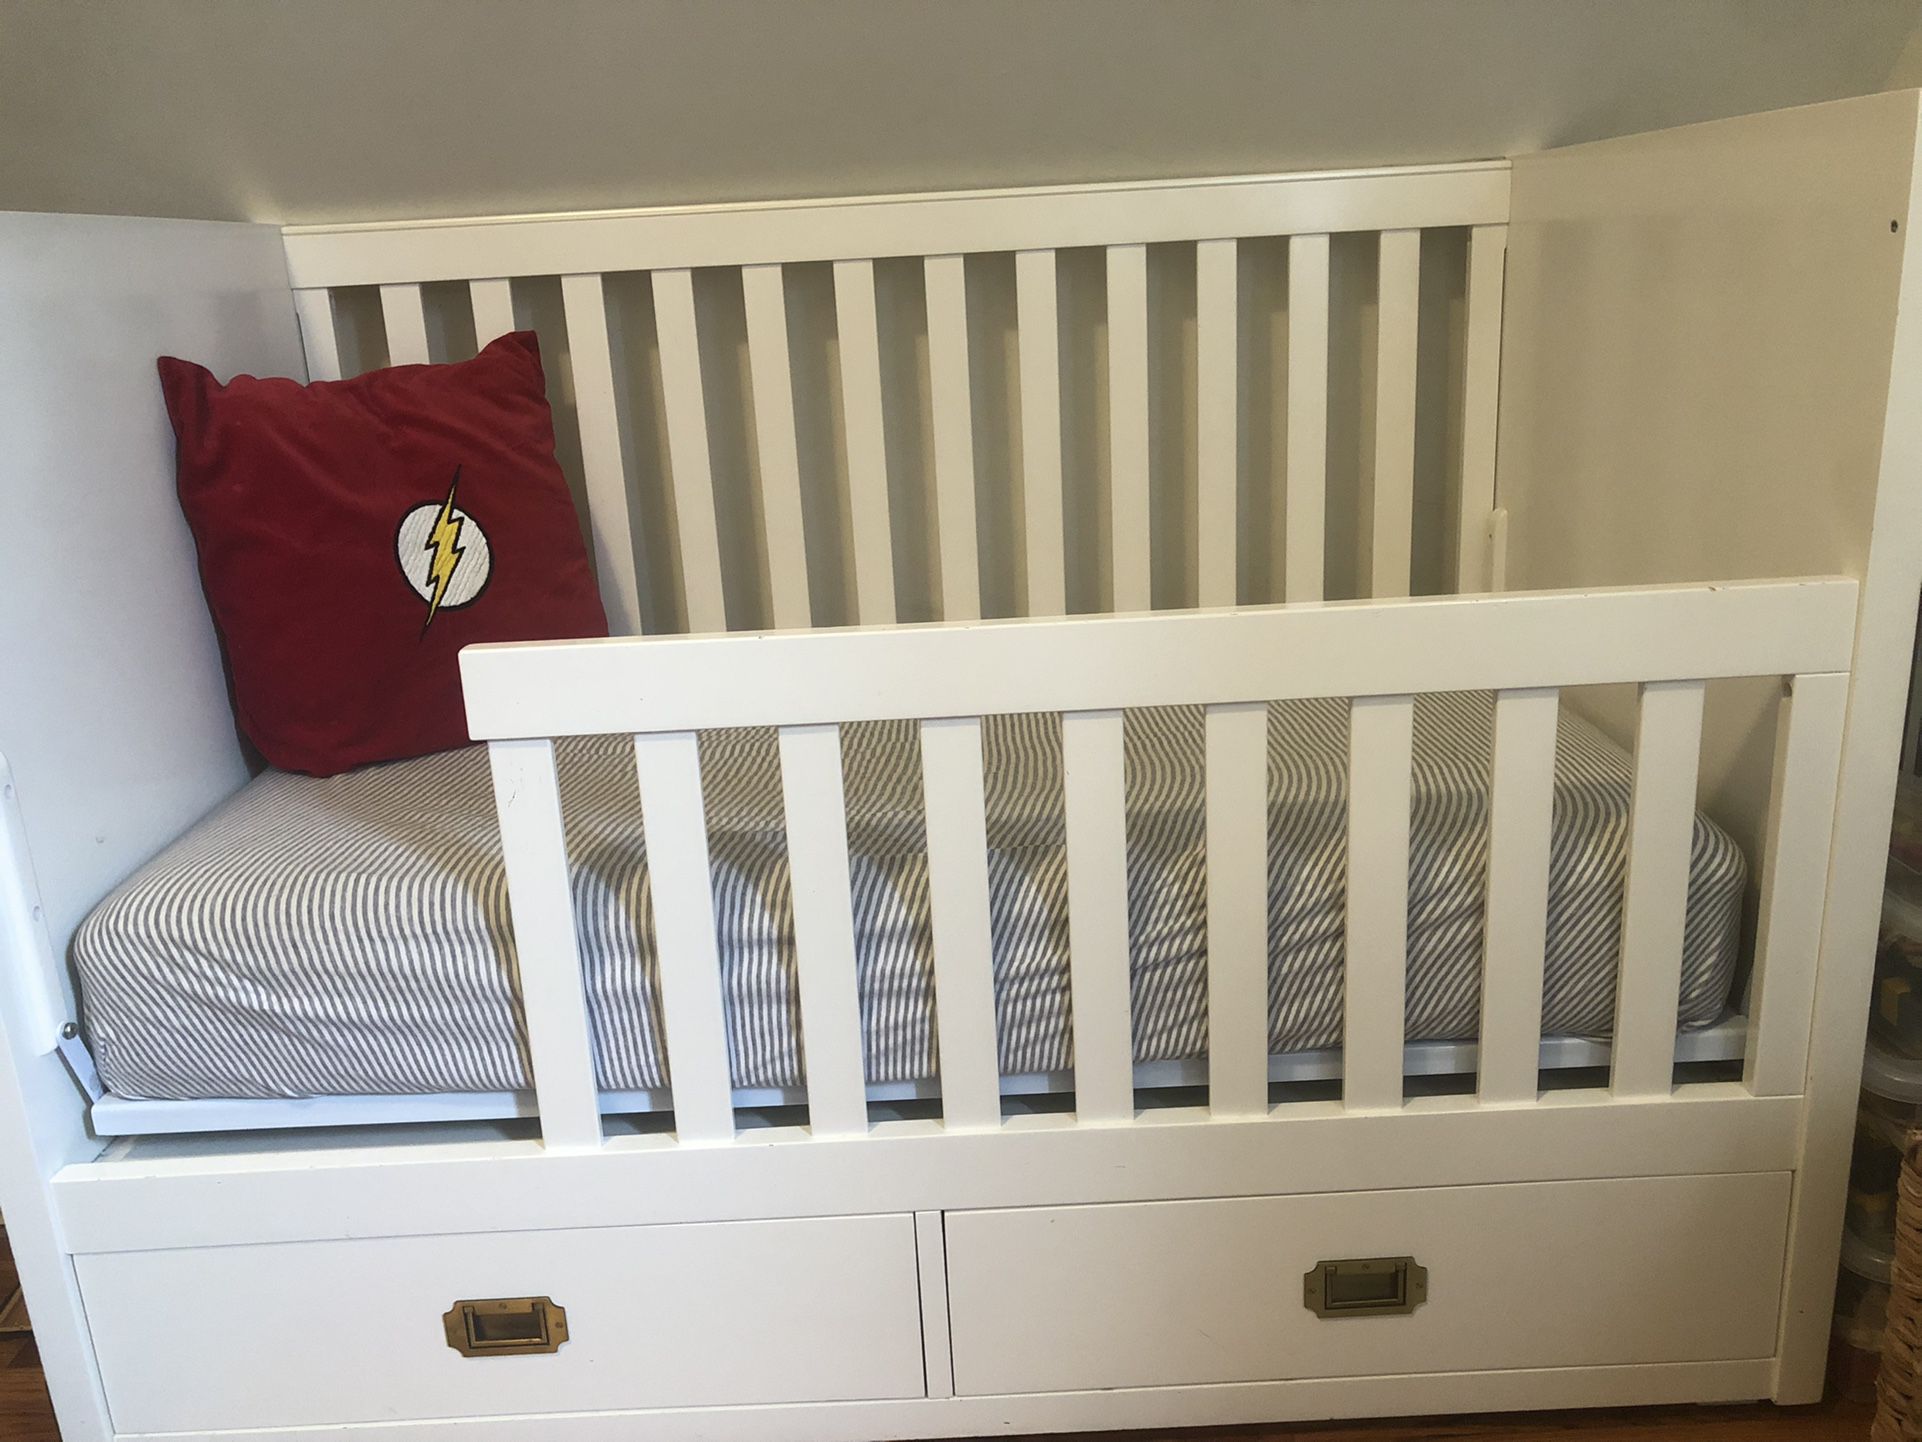 Pottery Barn Gemma Campaign Toddler bed and crib